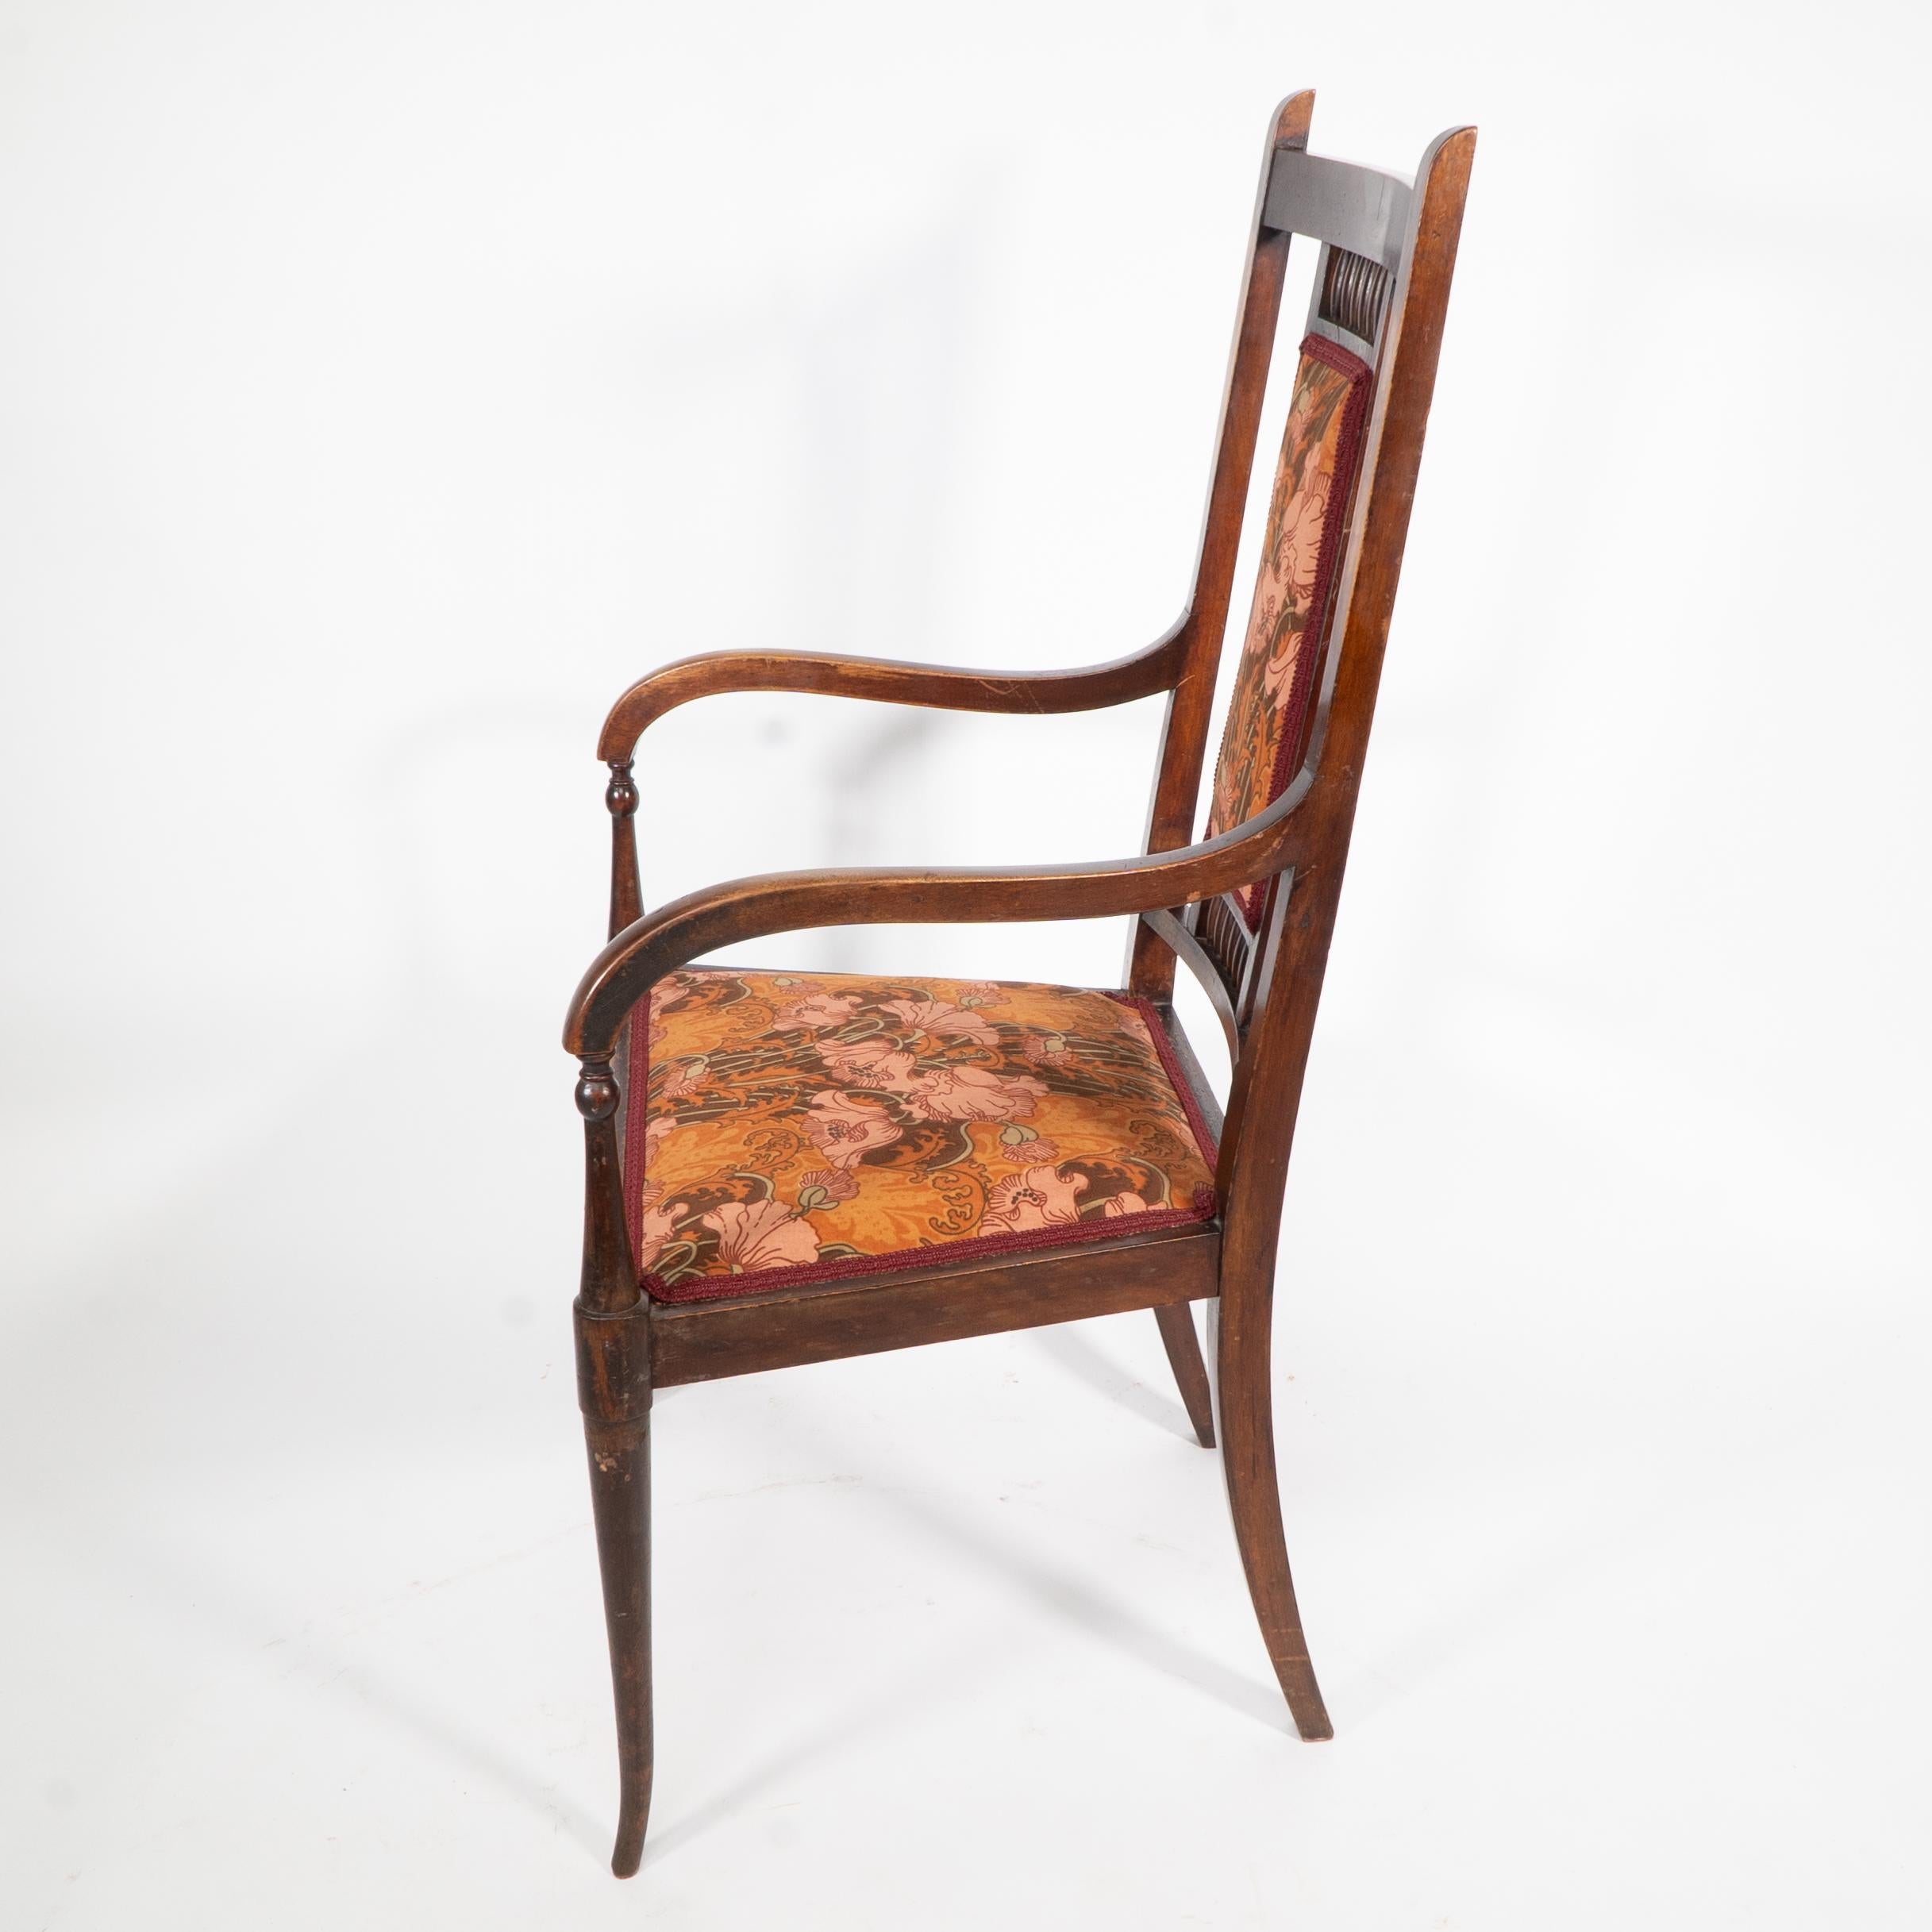 English George Walton for John Rowntree's cafe. An Arts and Crafts walnut armchair For Sale